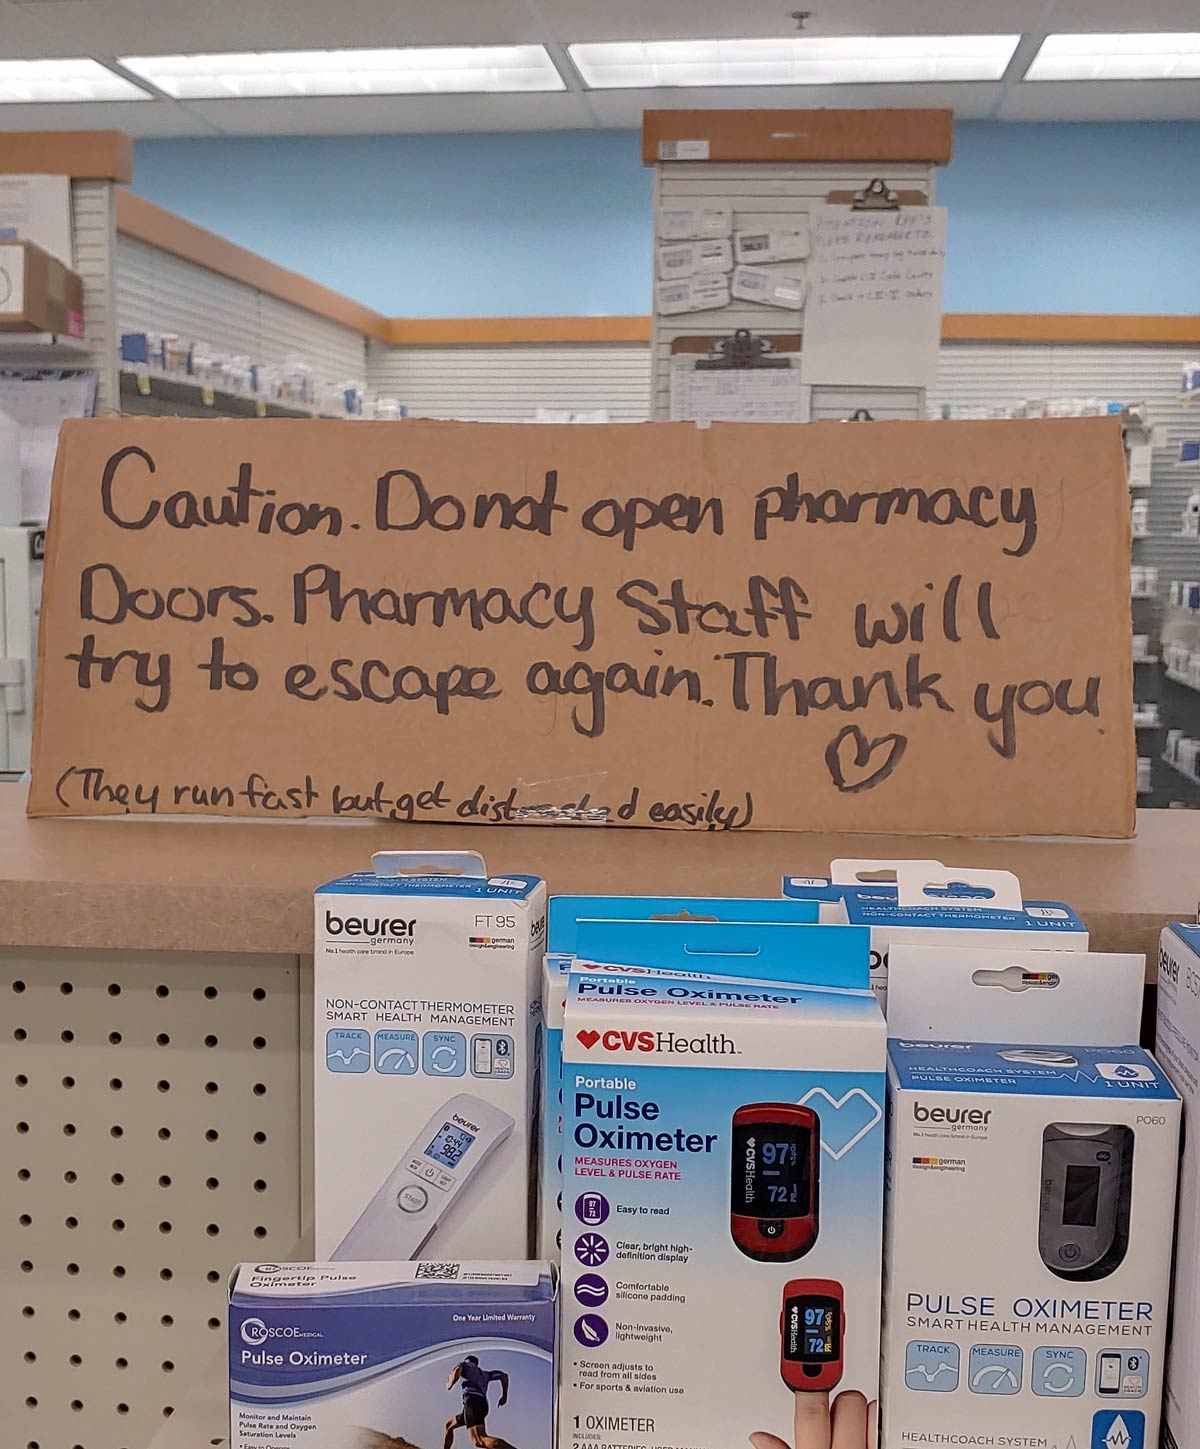 Saw a sign at the pharmacy today